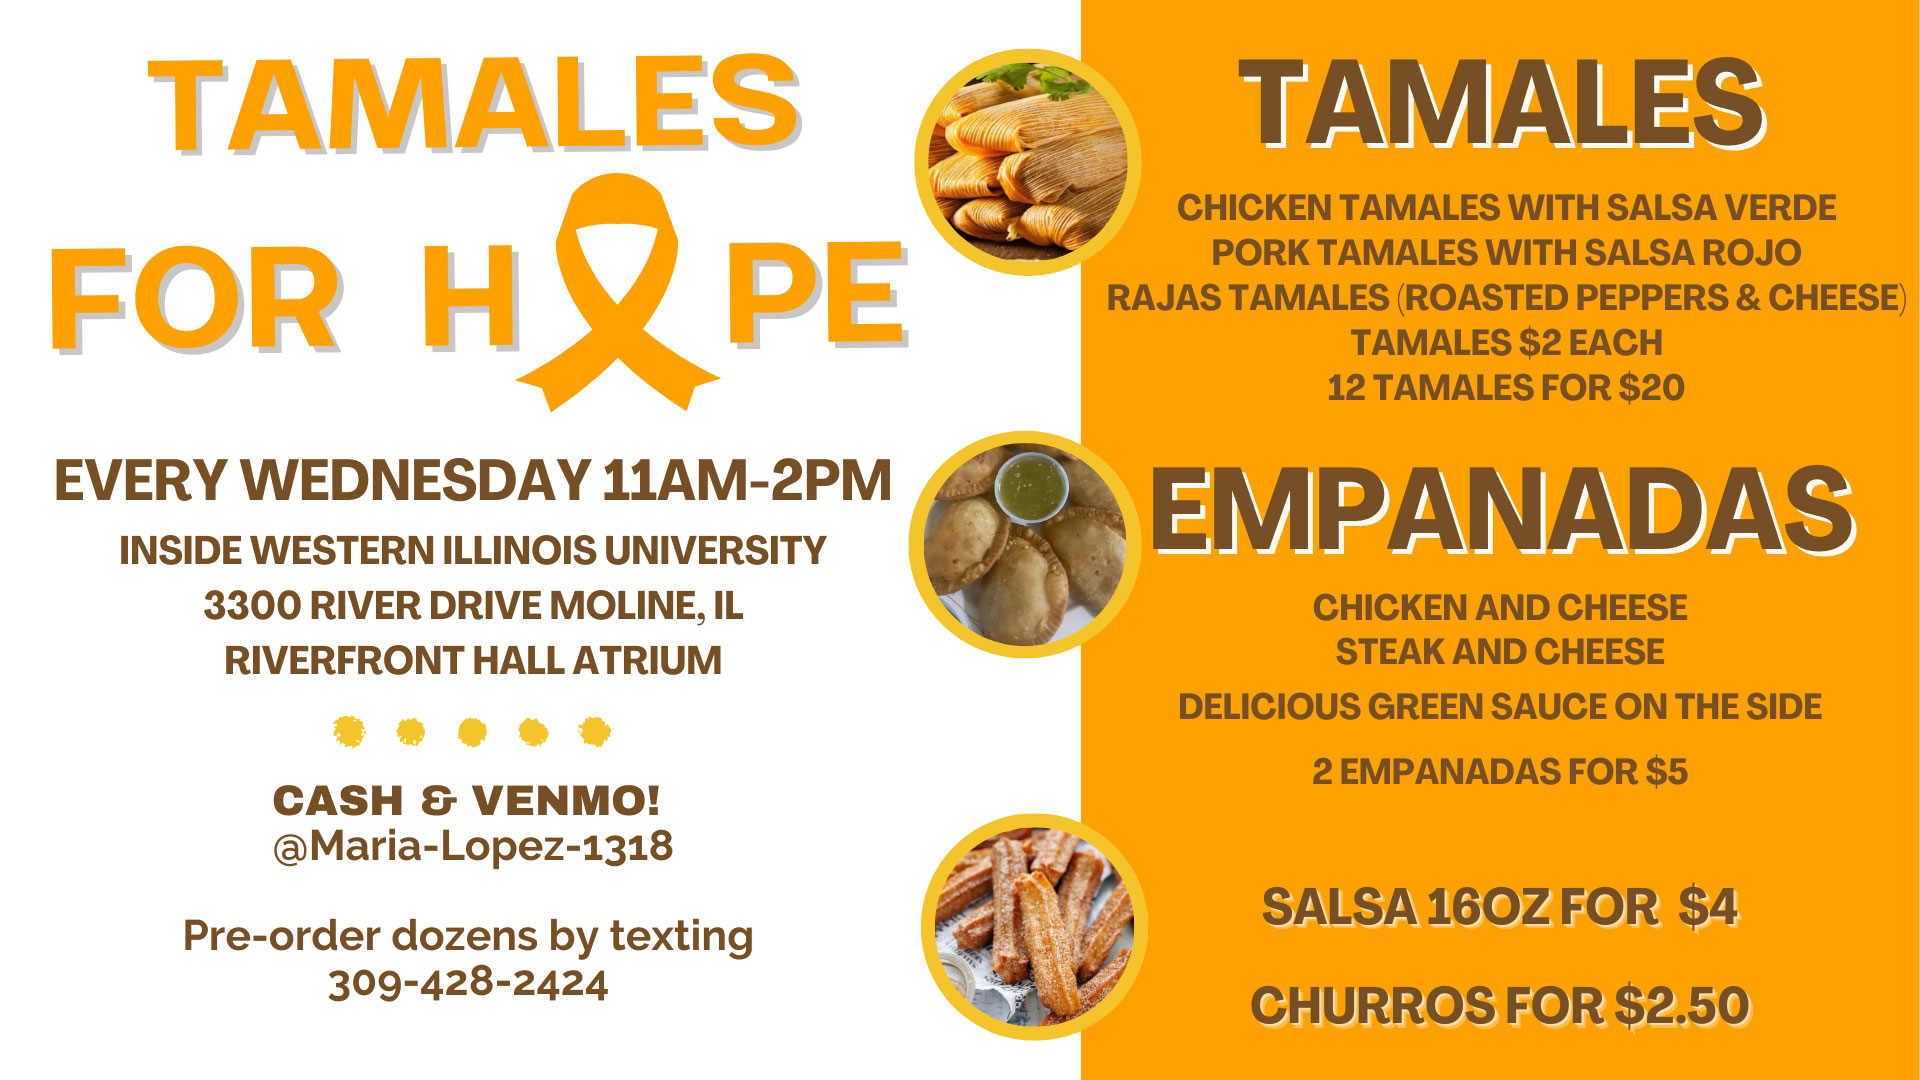 Tamales for Hope